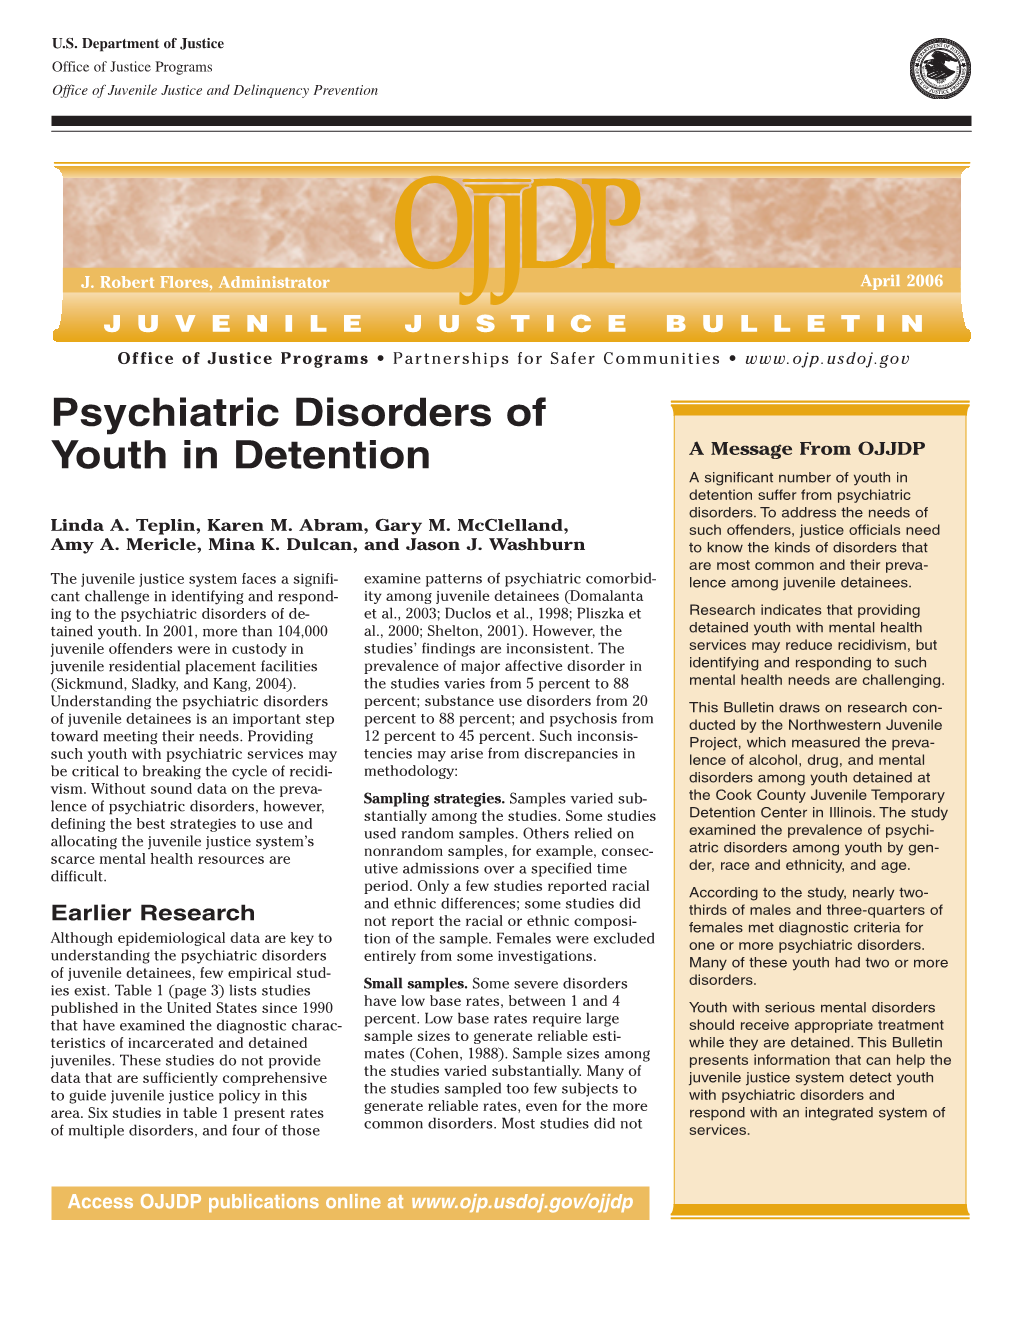 Psychiatric Disorders of Youth in Detention a Message from OJJDP a Significant Number of Youth in Detention Suffer from Psychiatric Disorders